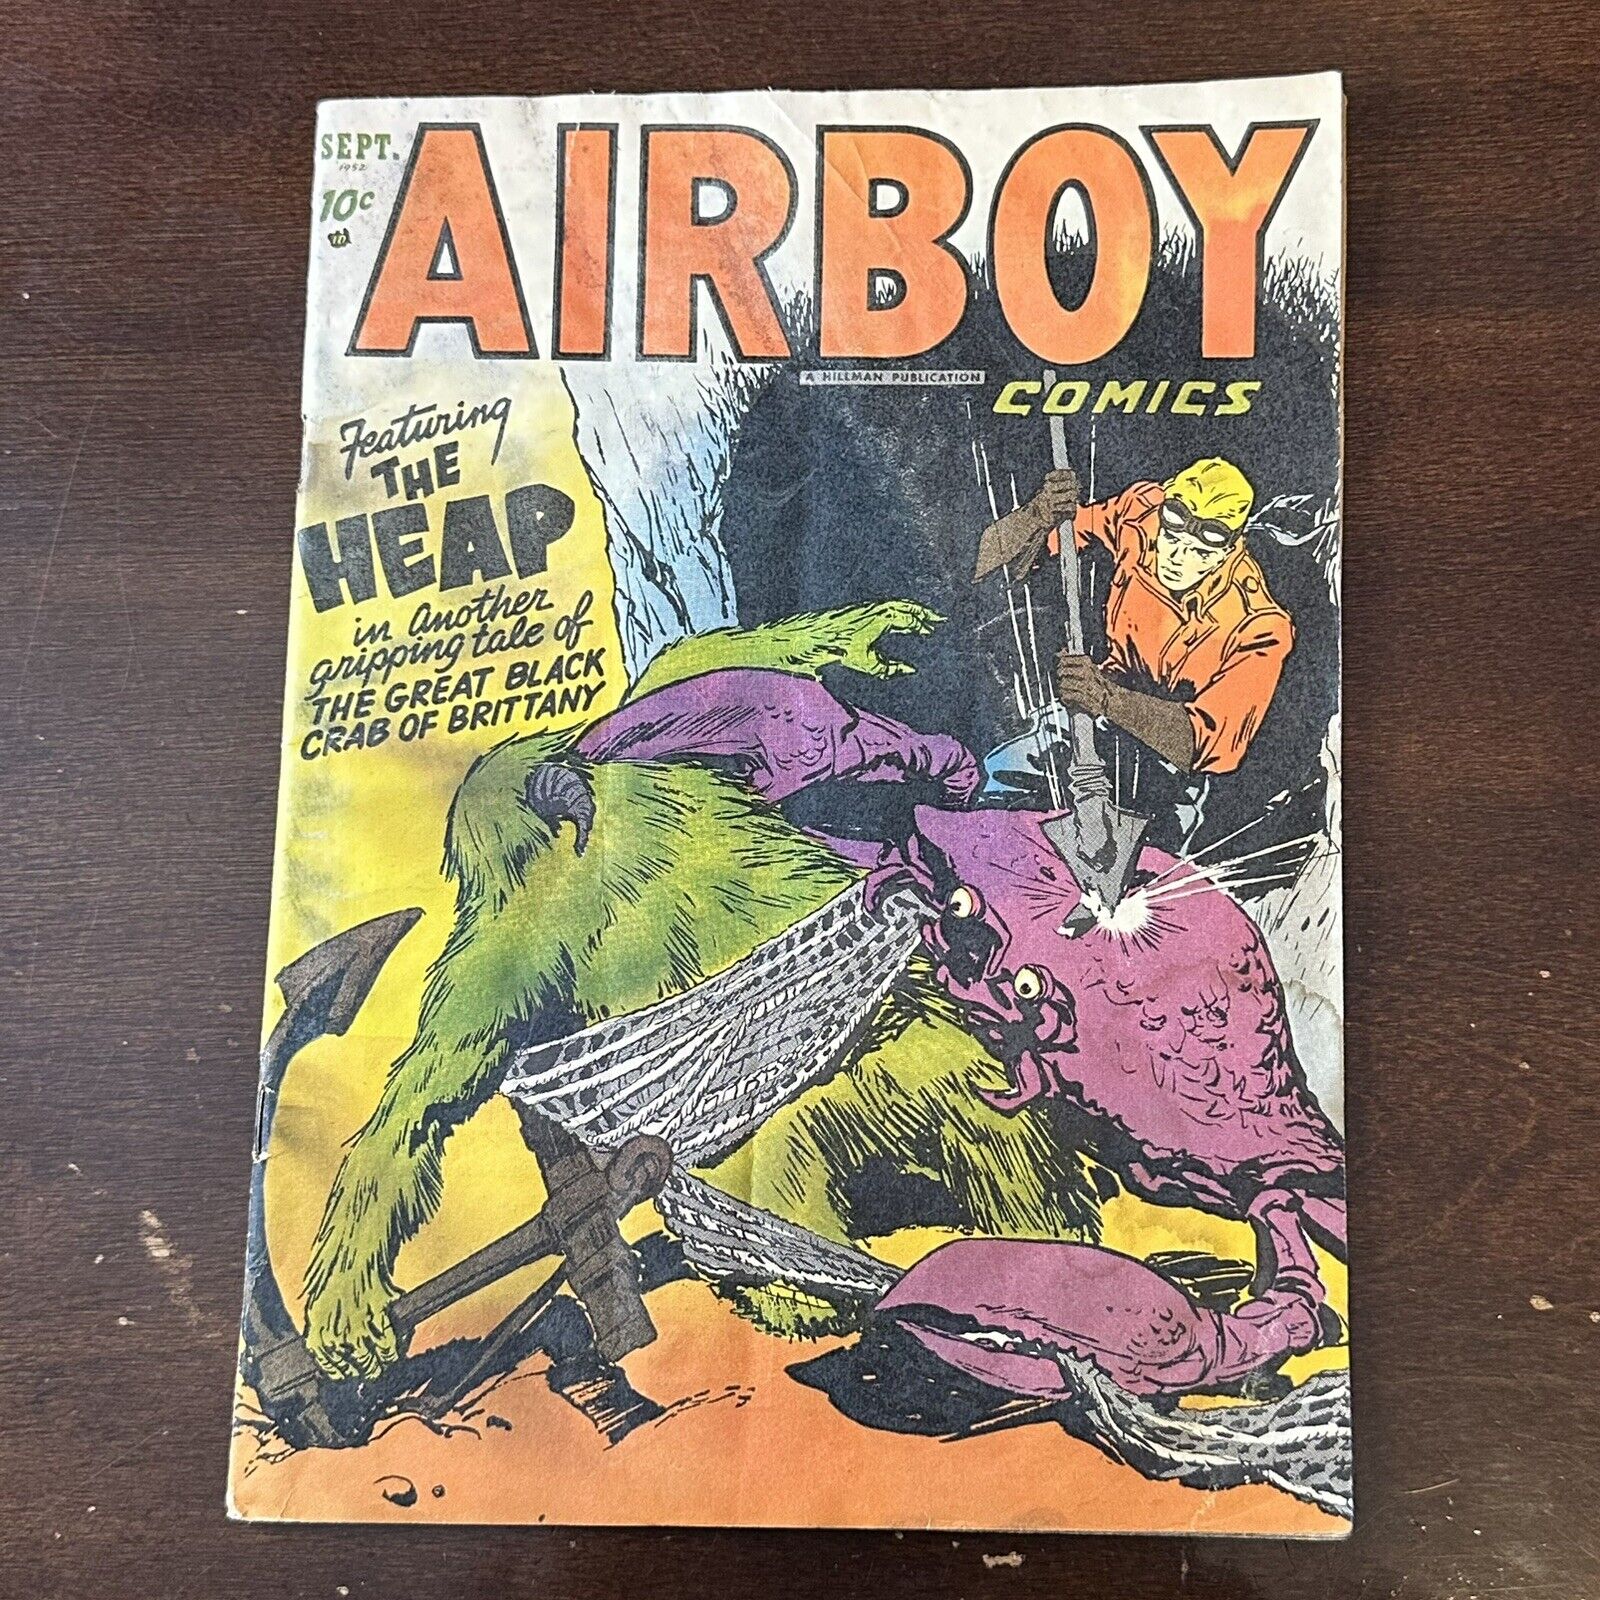 Airboy #8 (Volume 9) (1952) - Heap Cover and Story Golden Age